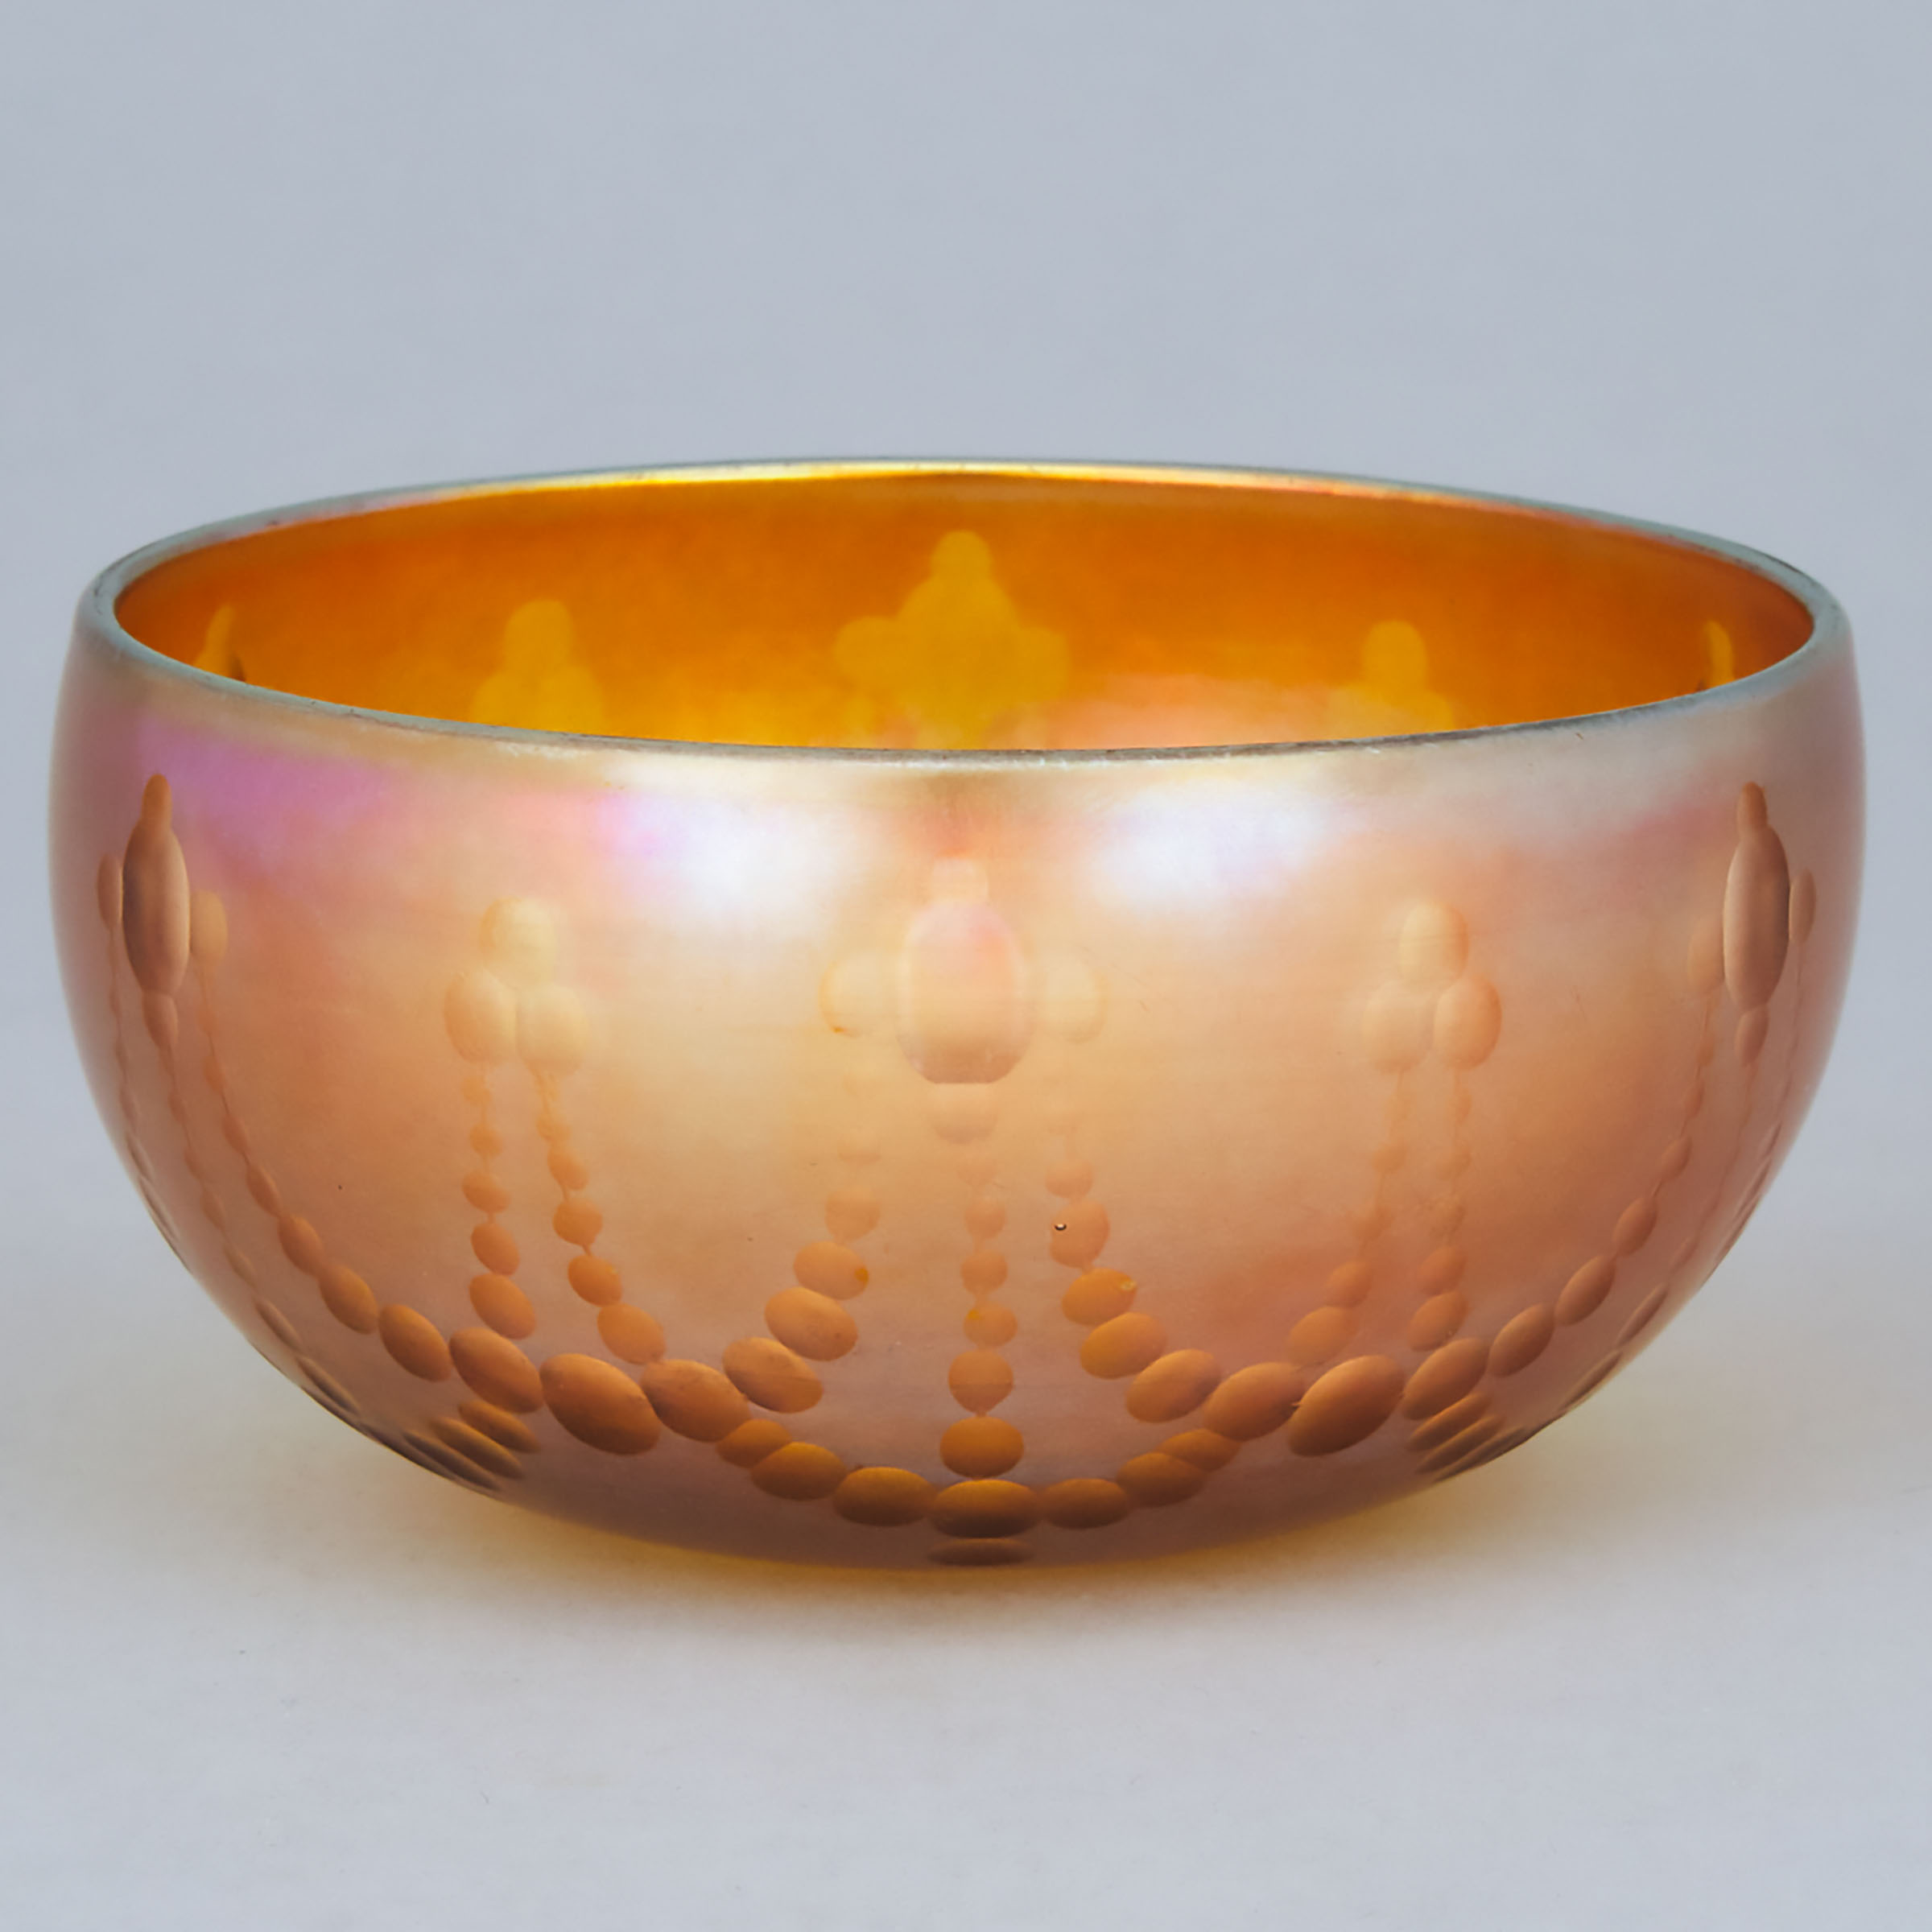 Tiffany 'Favrile' Small Etched Iridescent Glass Bowl, early 20th century